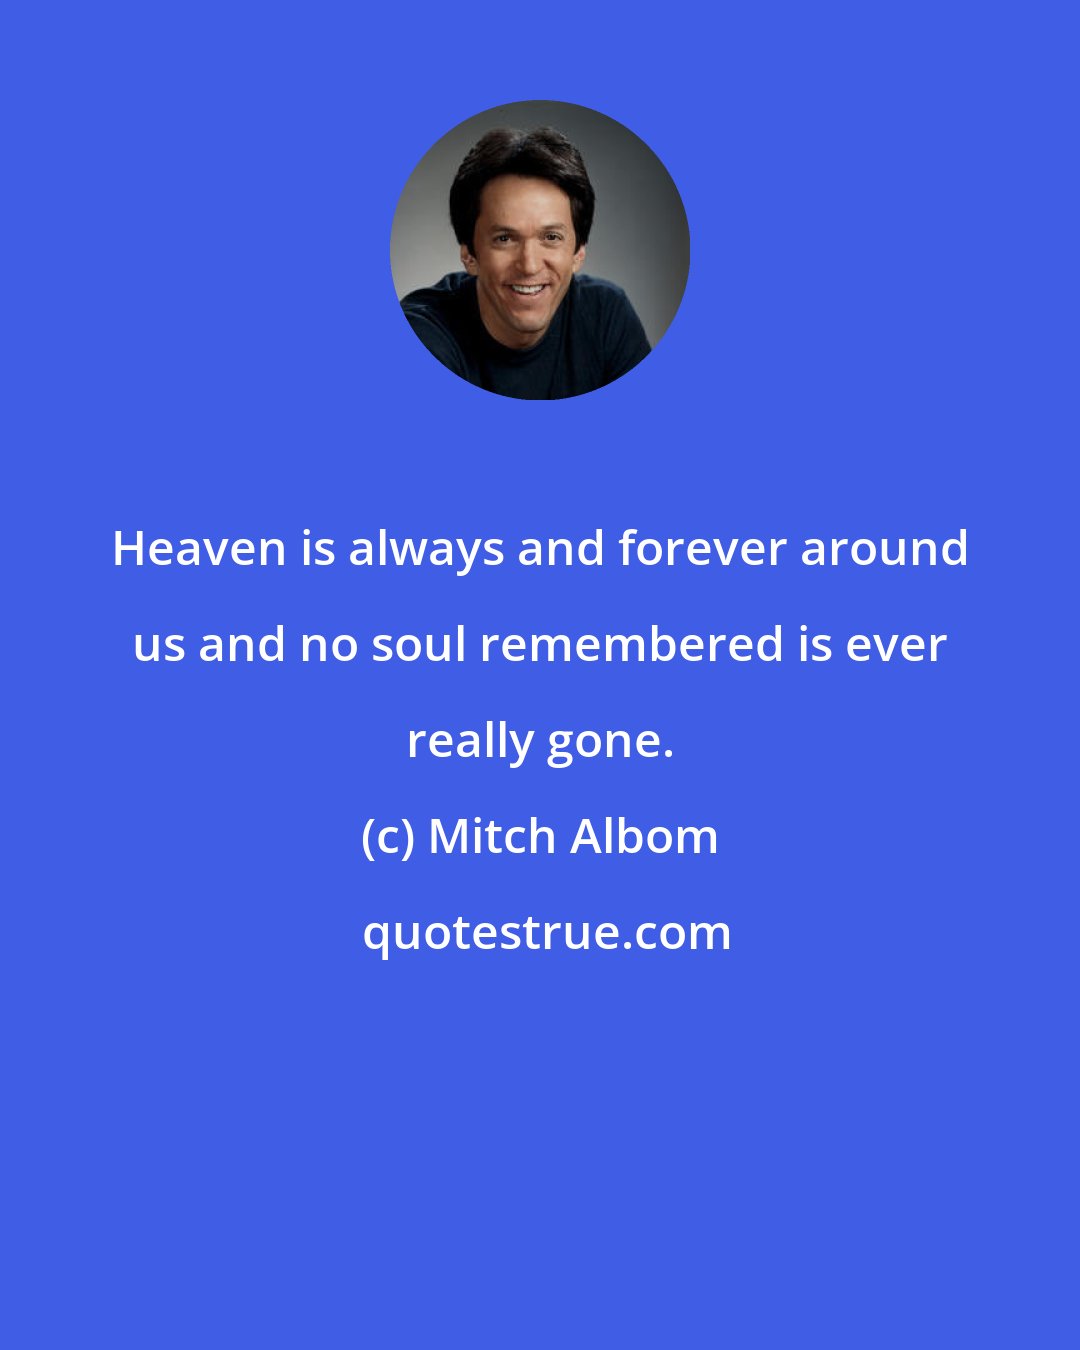 Mitch Albom: Heaven is always and forever around us and no soul remembered is ever really gone.